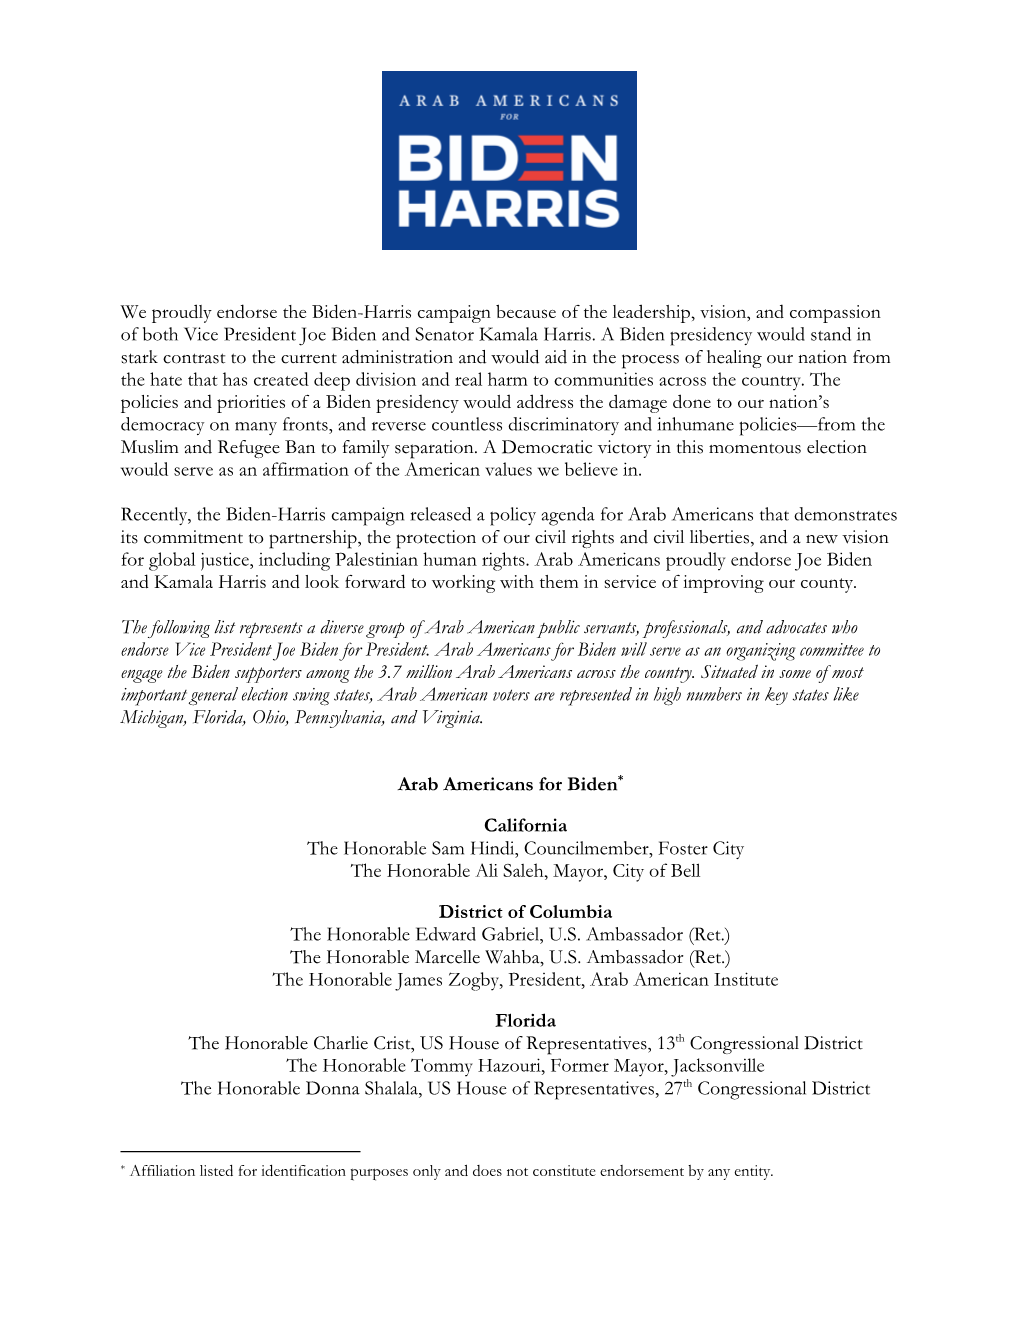 We Proudly Endorse the Biden-Harris Campaign Because of the Leadership, Vision, and Compassion of Both Vice President Joe Biden and Senator Kamala Harris